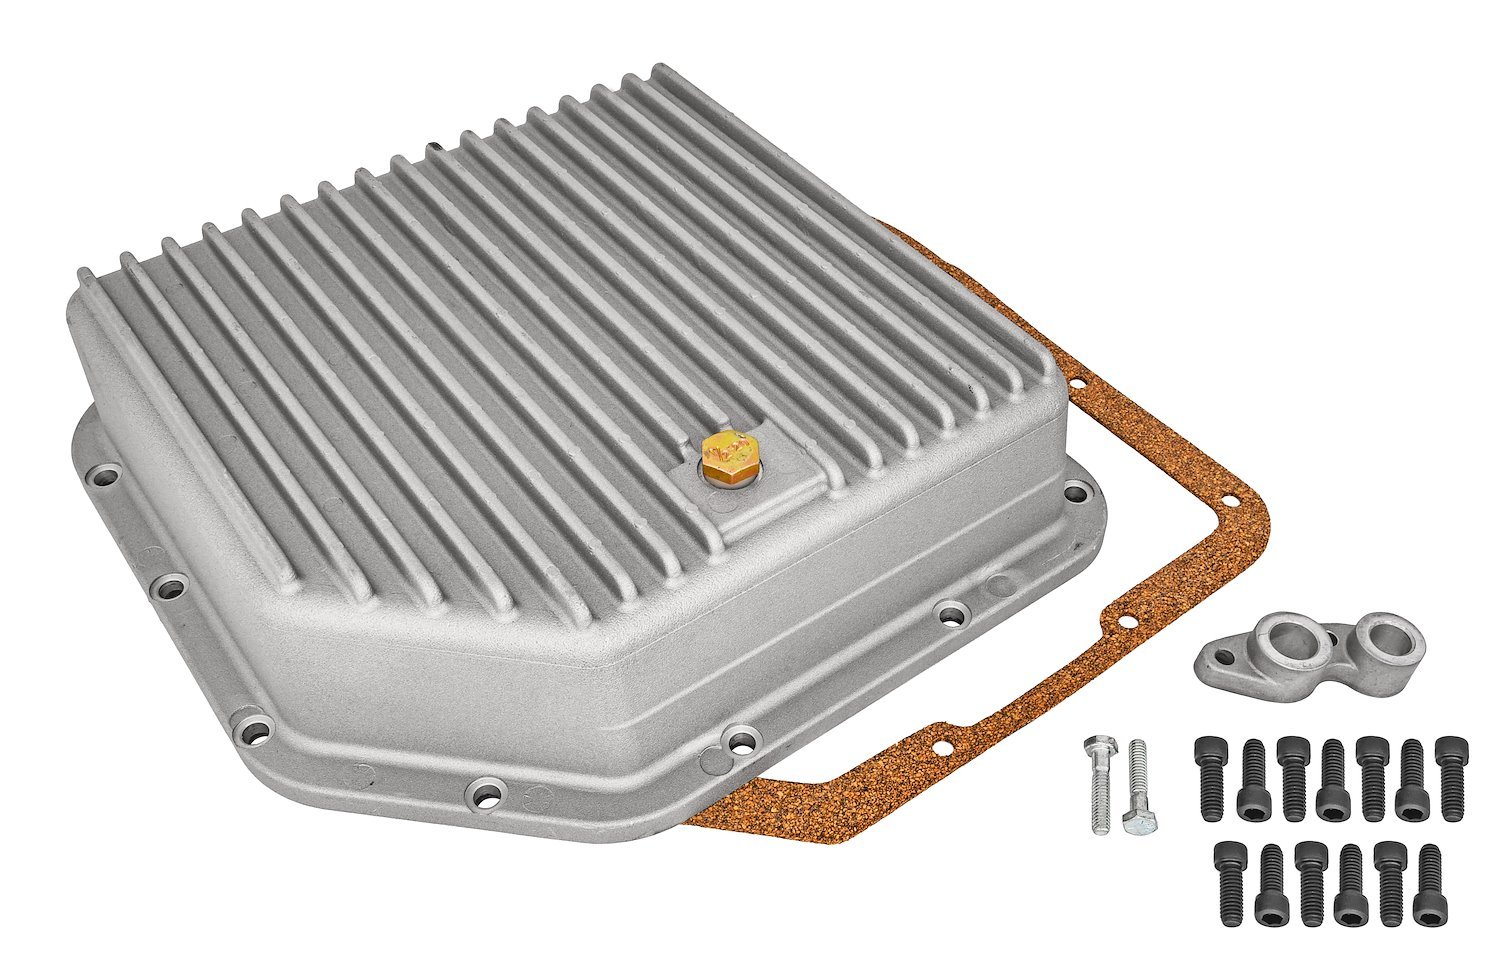 Cast Aluminum Transmission Pan for GM TH350 Automatic Transmission [3 1/2 in. Deep]